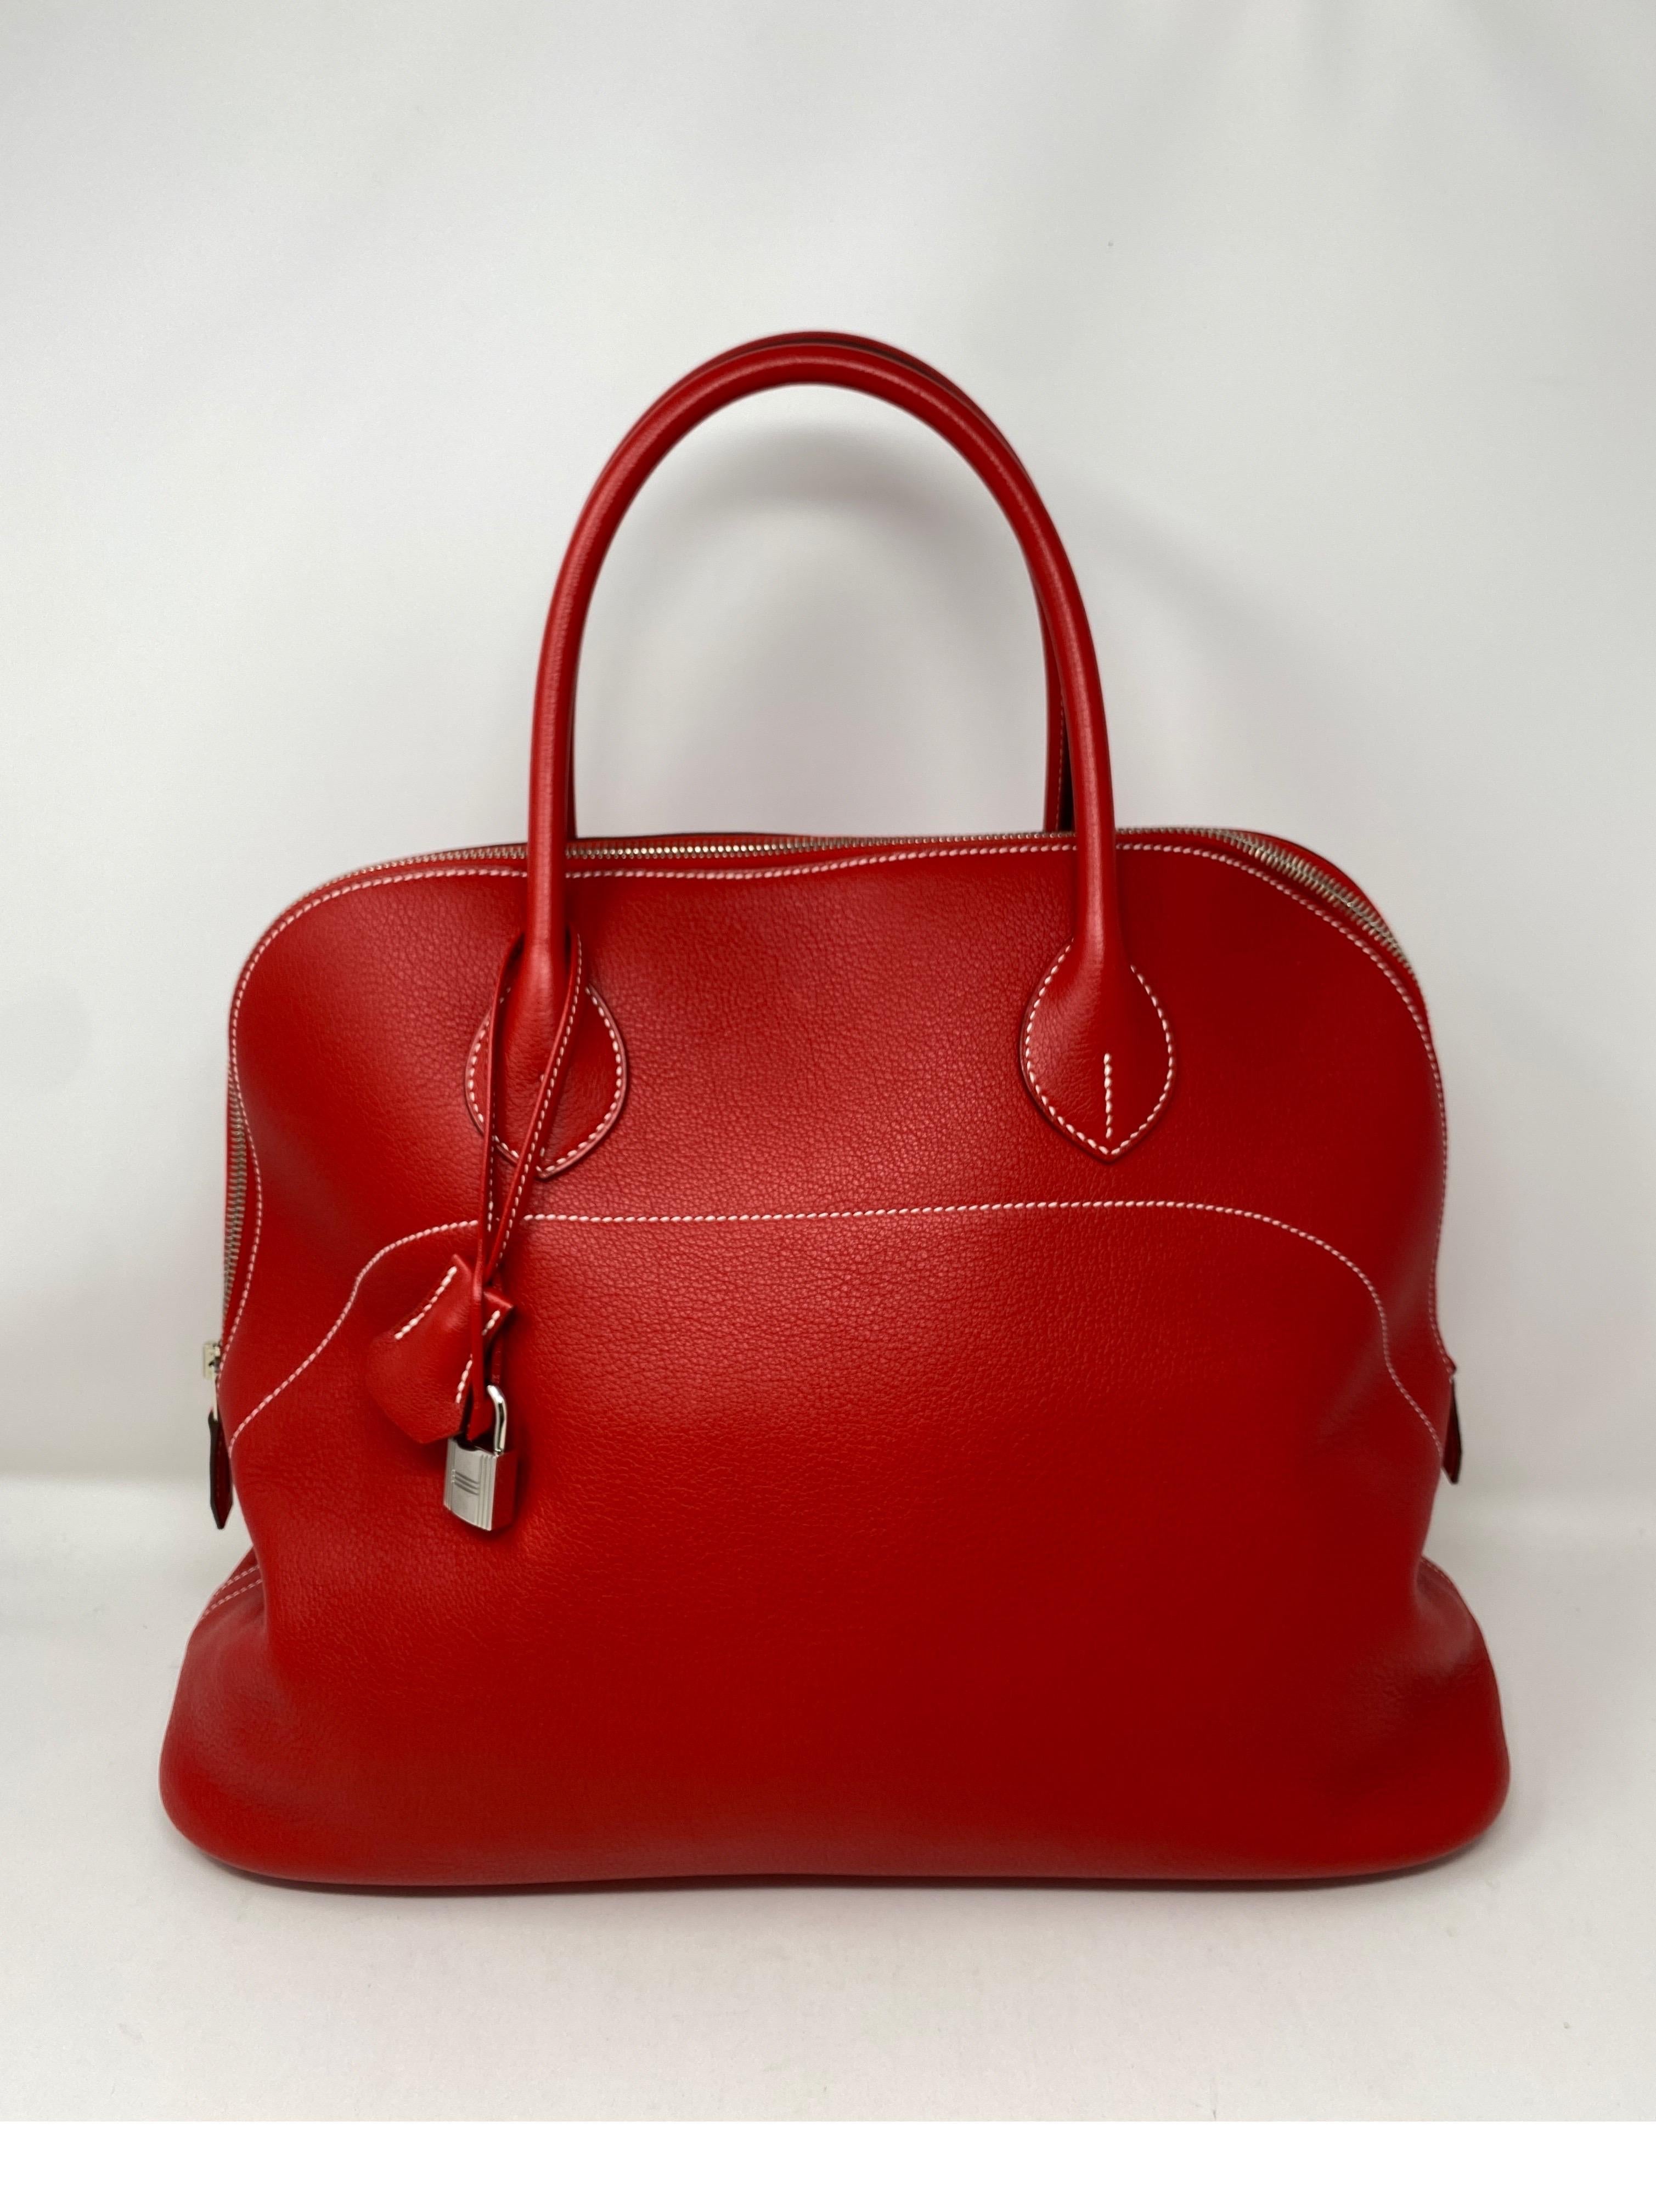 Hermes Red Bolide Bag. Beautiful red leather Hermes bag. Palladium hardware. Large size Bolide. Includes clochette, lock, keys and dust cover. Guaranteed authentic. 